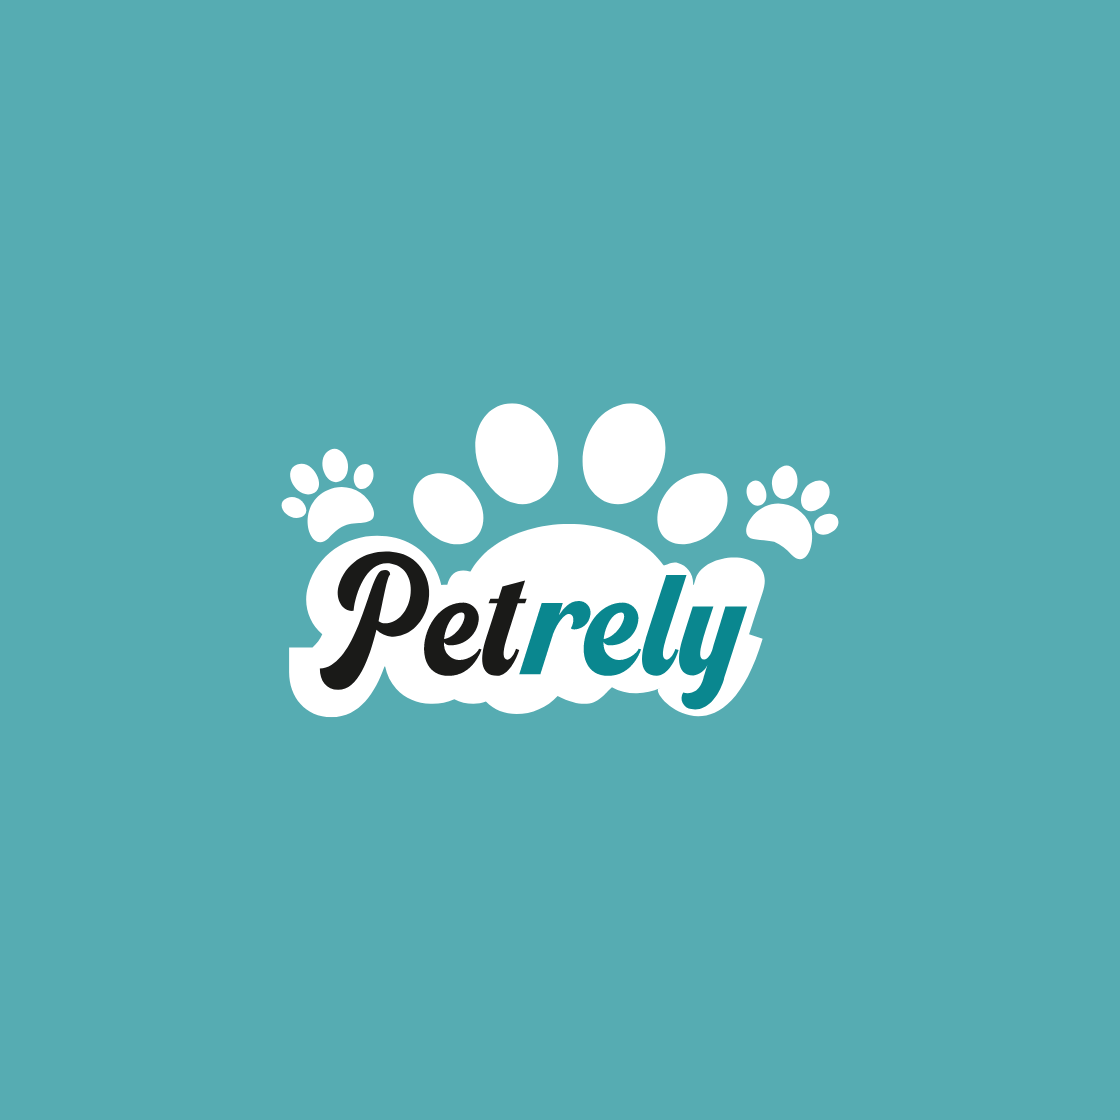 petrely